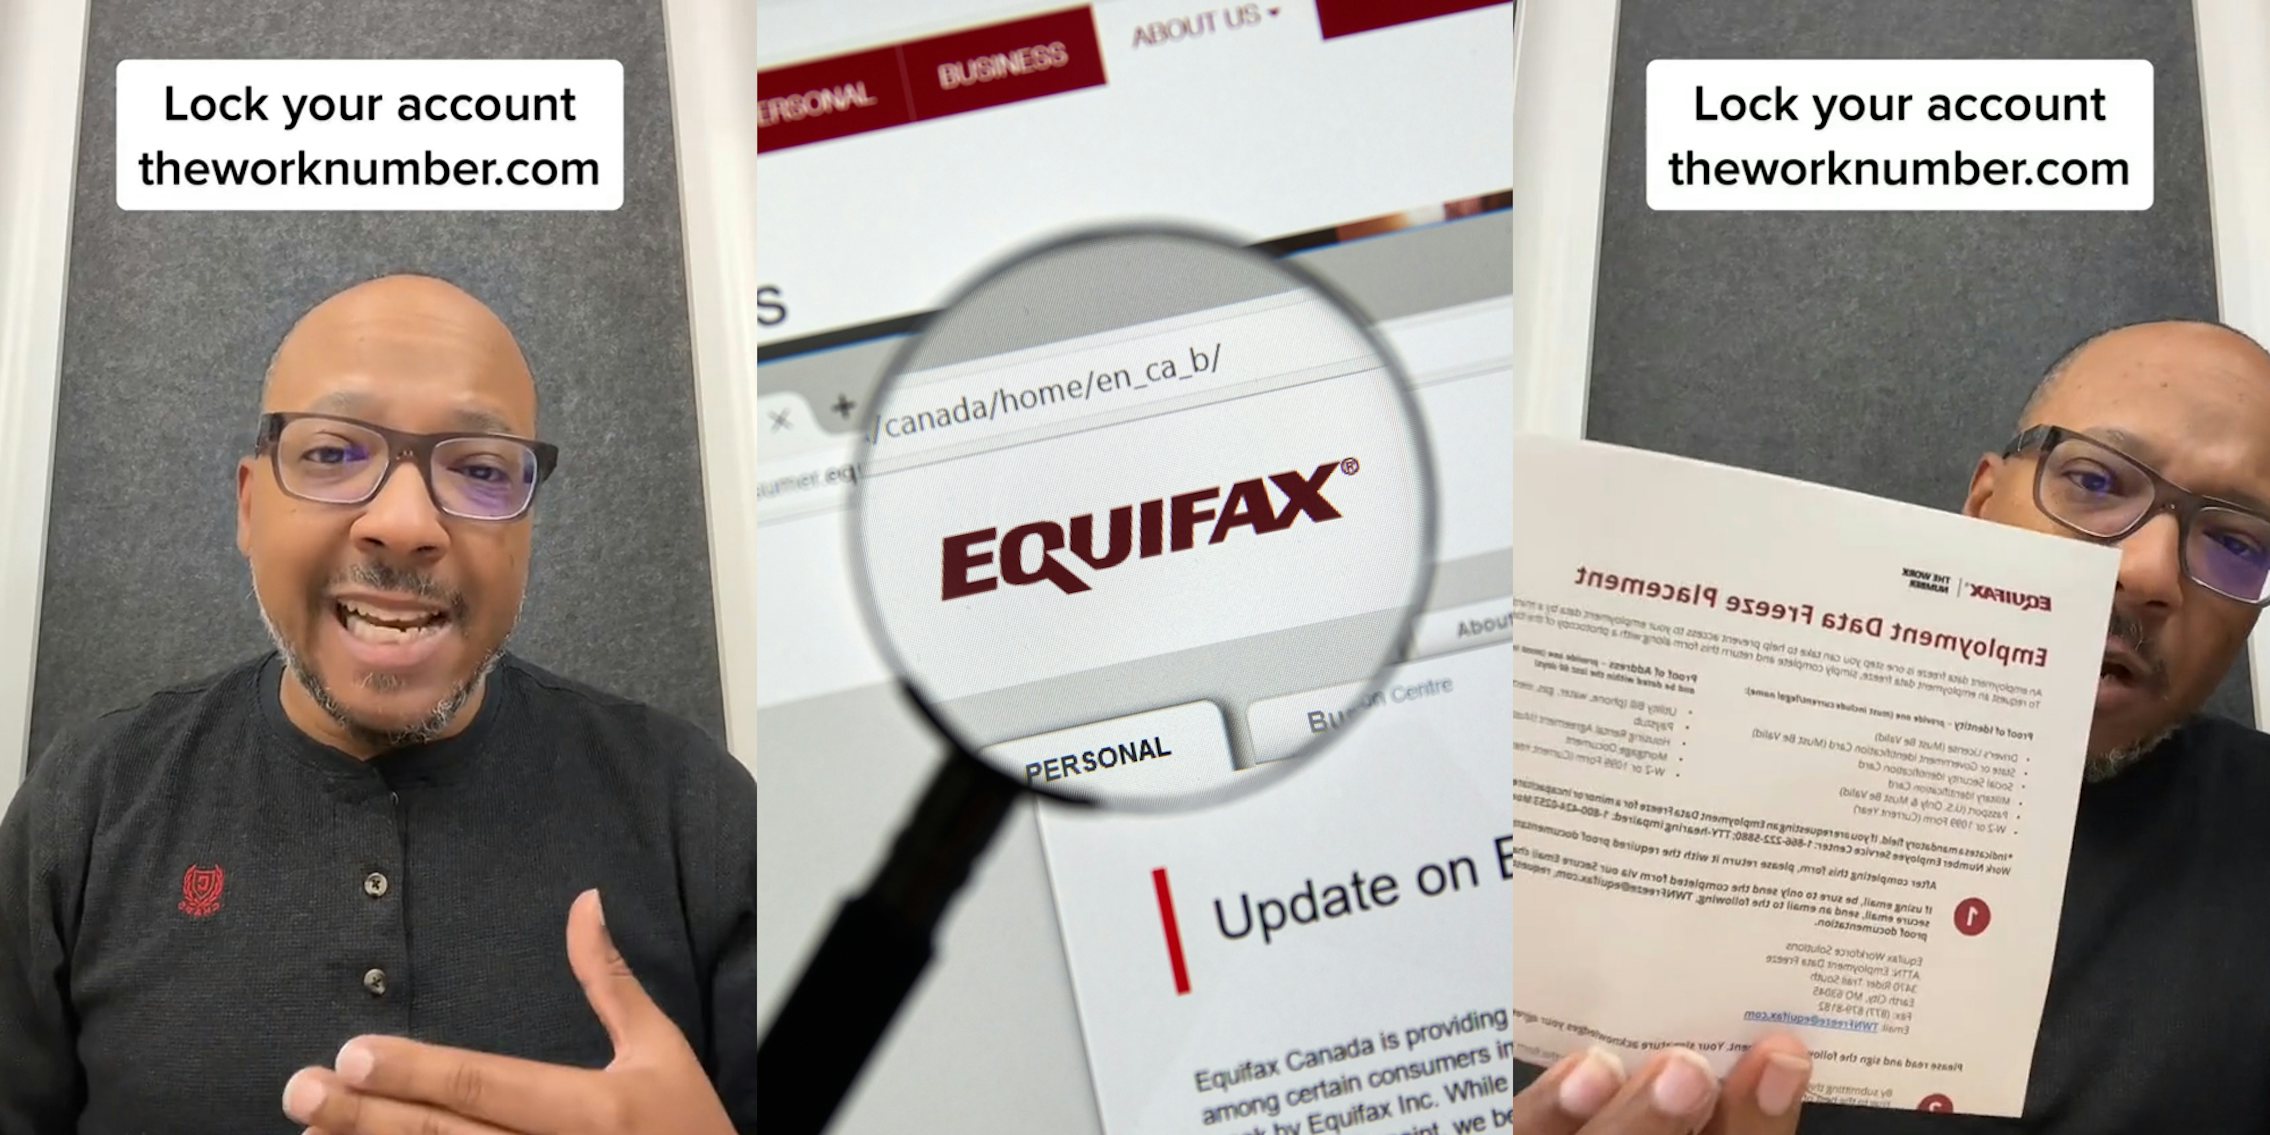 worker speaking with caption 'Lock your account theworknumber.com' (l) Equifax in magnifying glass view on screen (c) worker speaking holding Equifax paper with caption 'Lock your account theworknumber.com' (r)